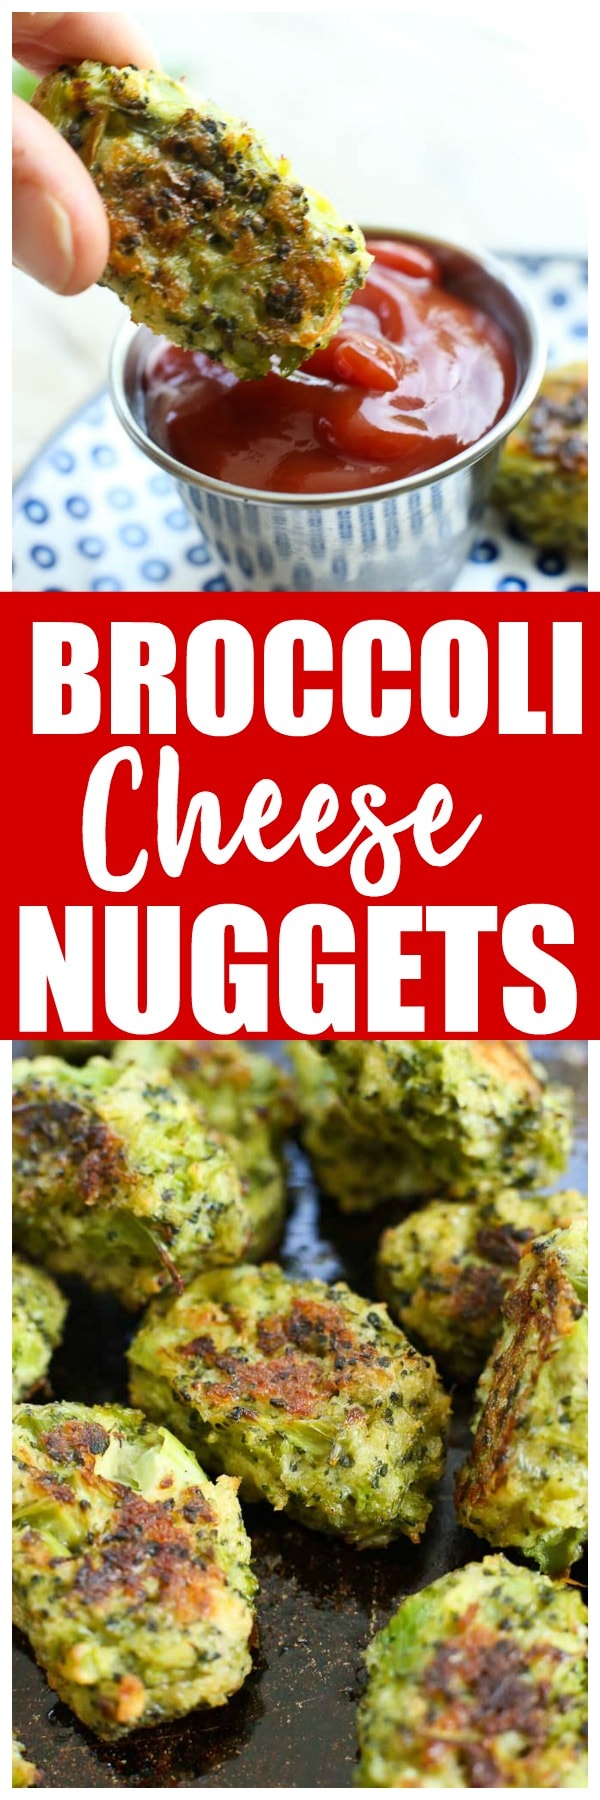 Broccoli cheese bites nuggets recipe | toddler | vegetable | side dish | healthy